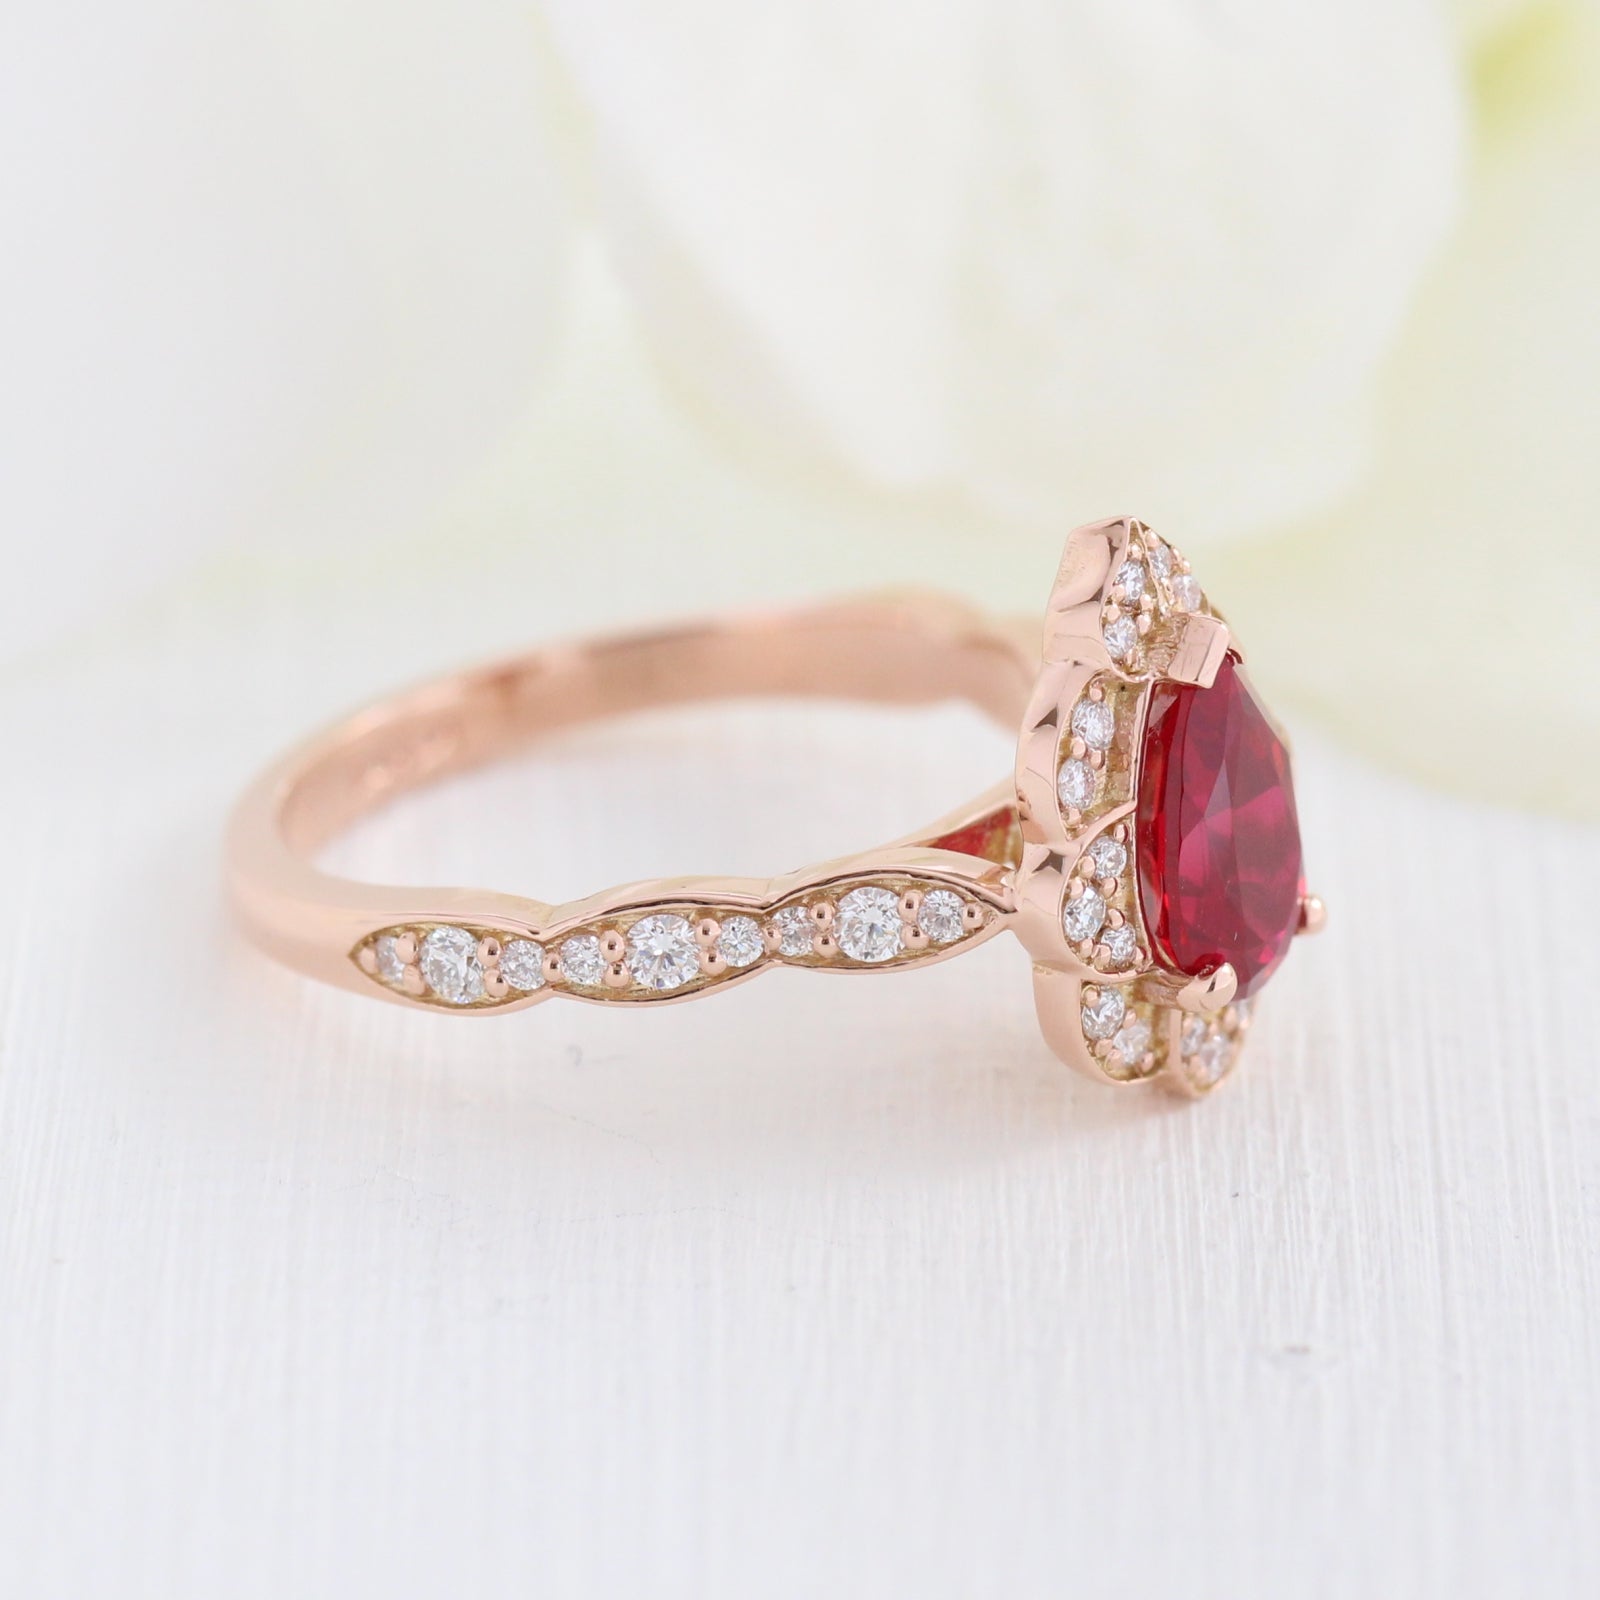 vintage halo diamond pear ruby ring stack rose gold curved diamond wedding band la more design jewelry